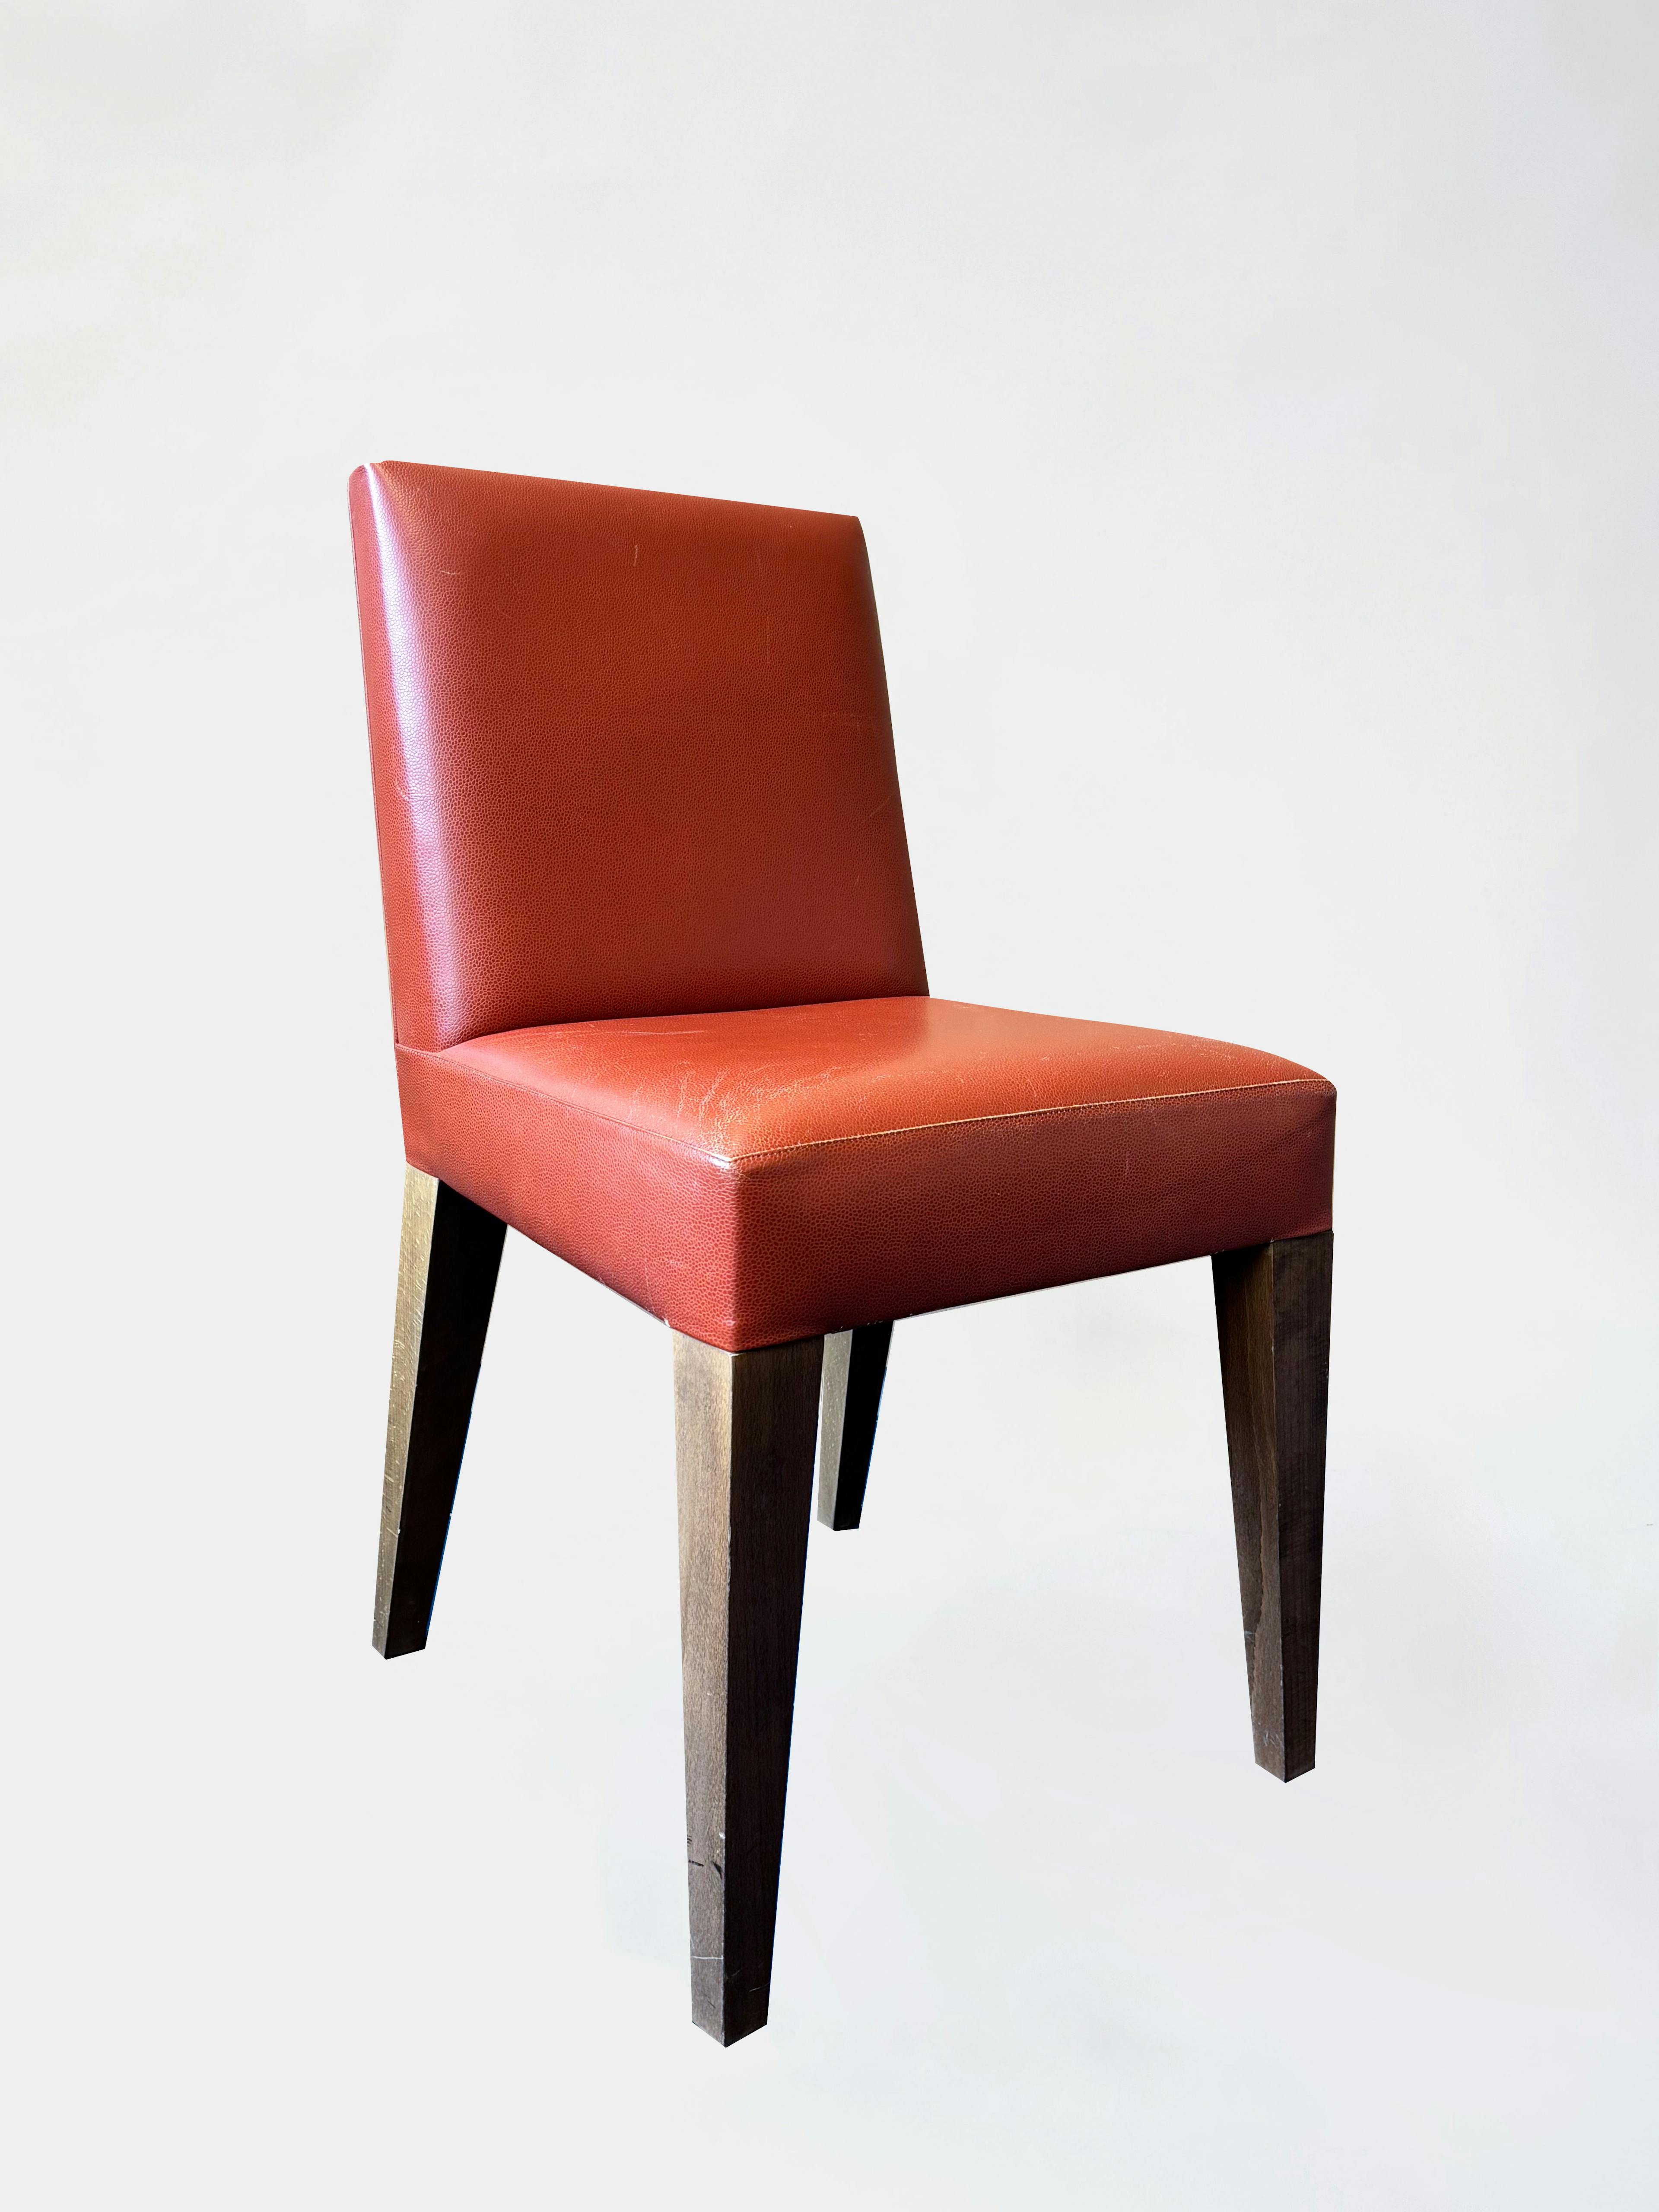 Terracotta Faux Leather Accent Chair with Dark Wood Legs - Relieve Furniture